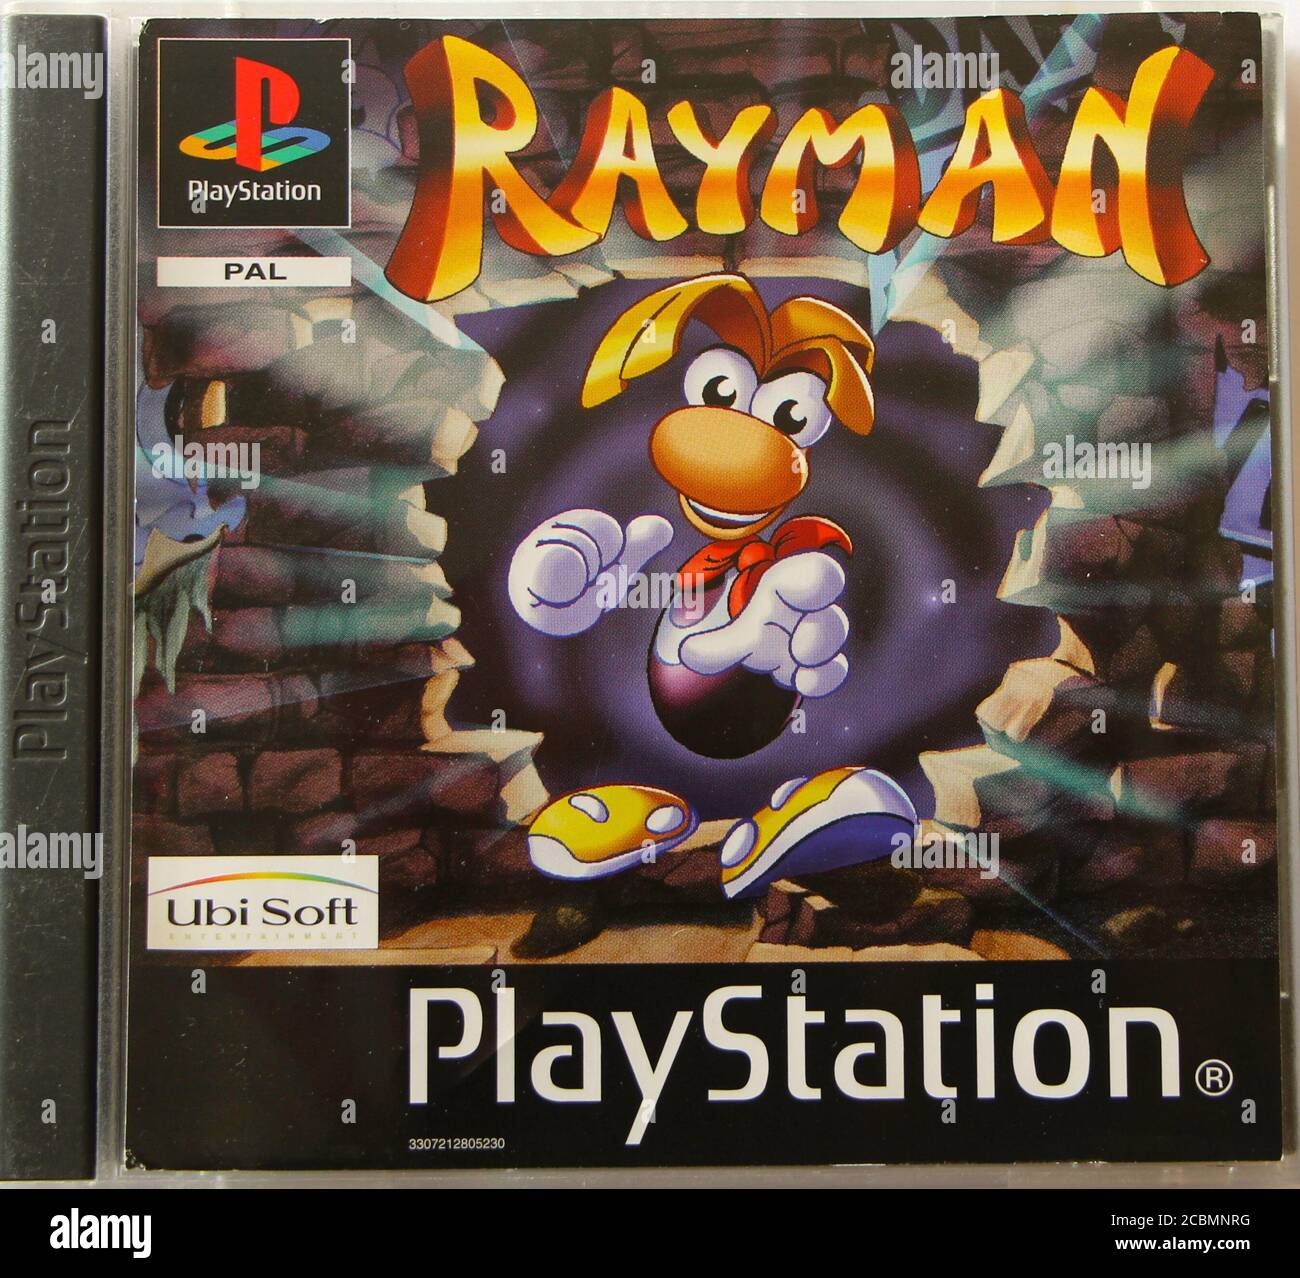 Photo of an Original Playstation 1 CD box and cover for Rayman the original  game by Ubisoft Stock Photo - Alamy